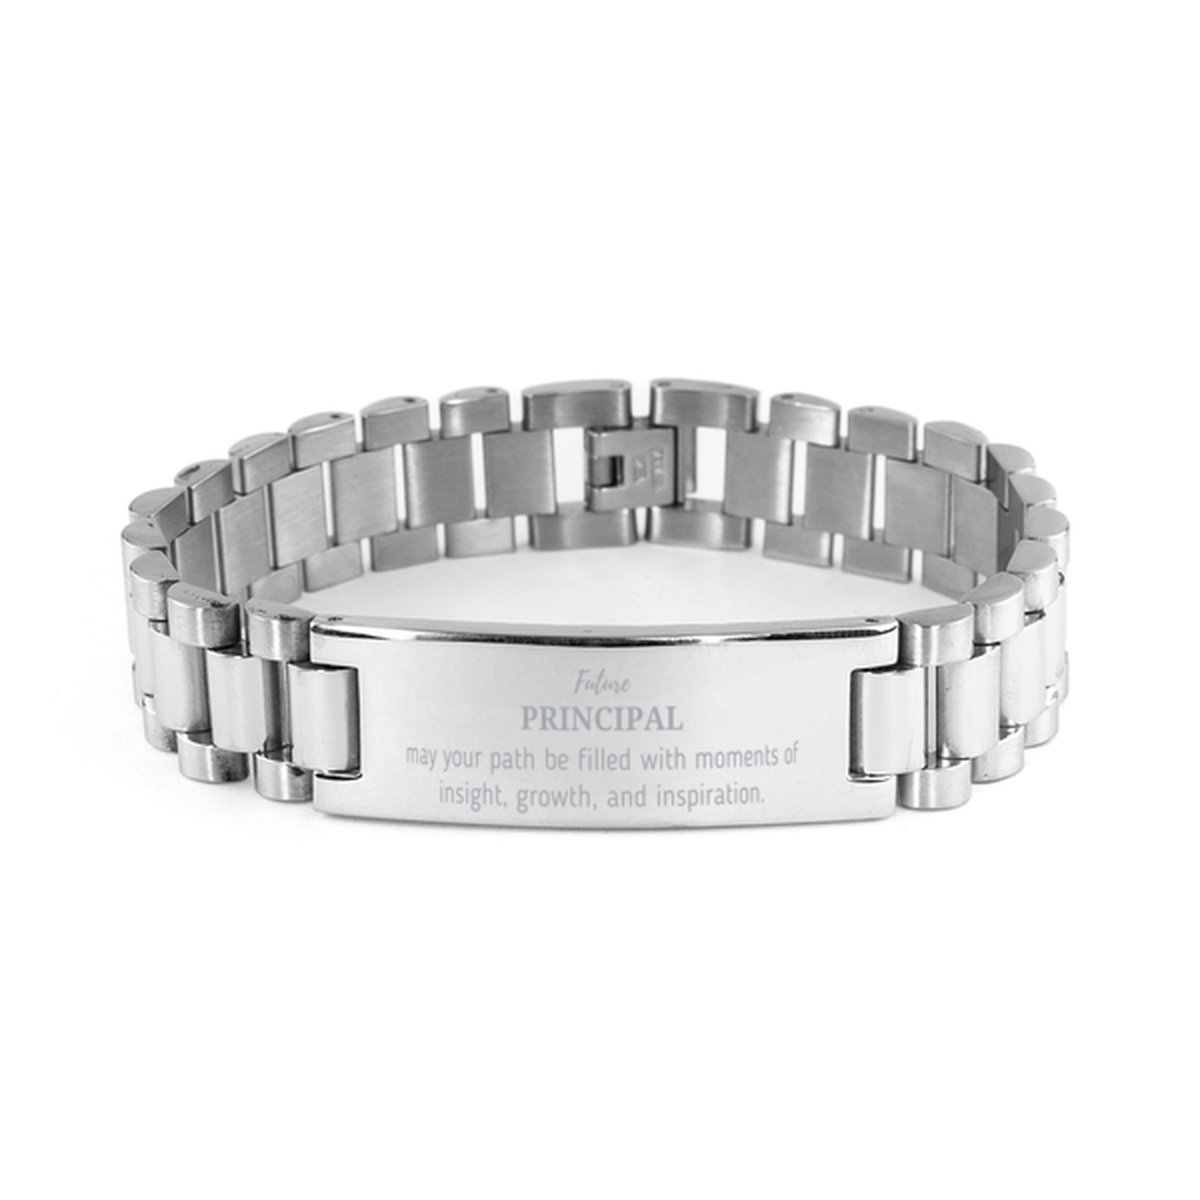 Future Principal Gifts, May your path be filled with moments of insight, Graduation Gifts for New Principal, Christmas Unique Ladder Stainless Steel Bracelet For Men, Women, Friends